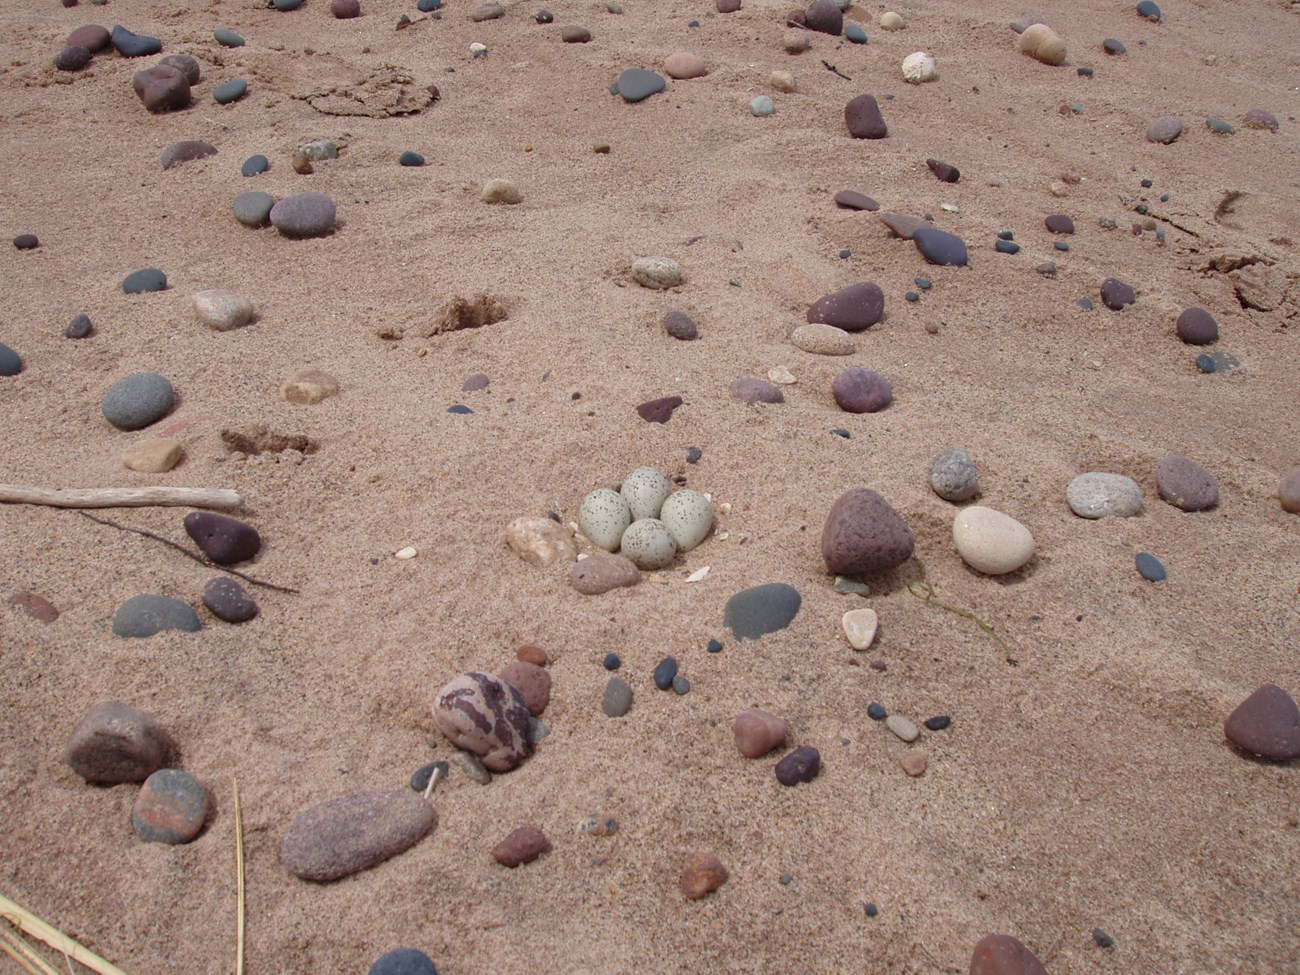 Four small speckled eggs on sand beach surrounded by rocks of various size and color.